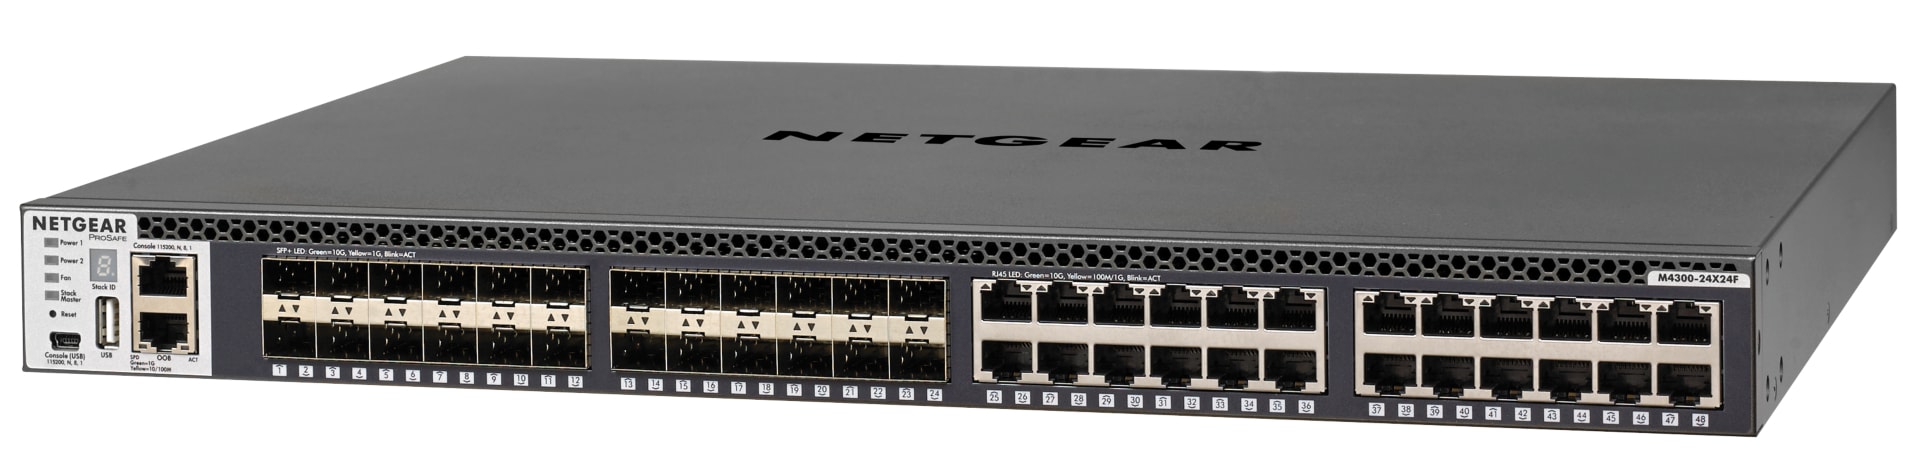 M4300 Managed Switches